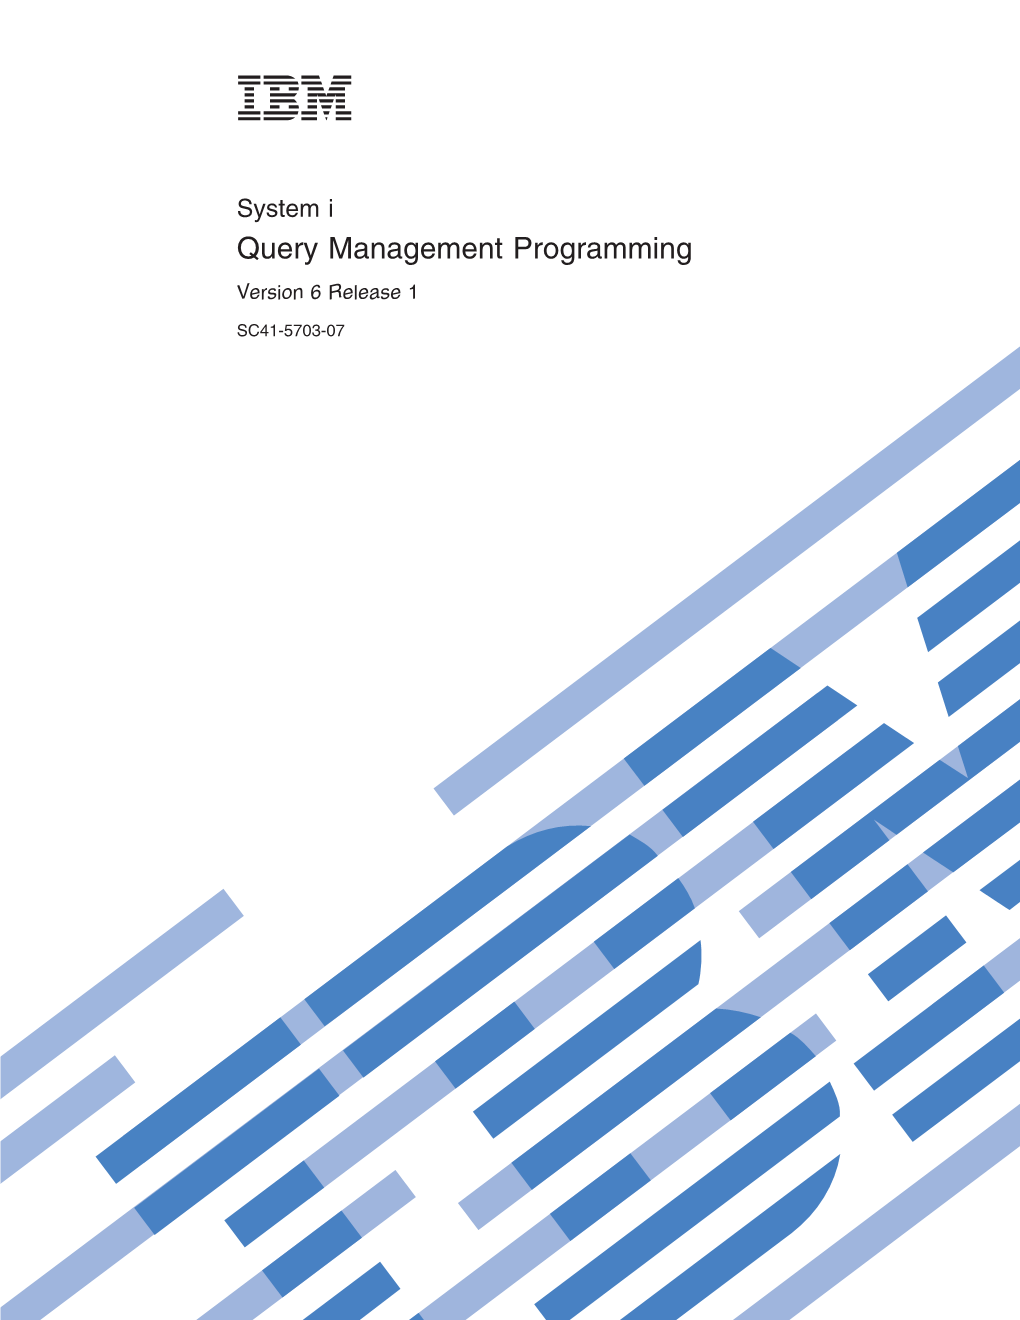 System I: Query Management Programming